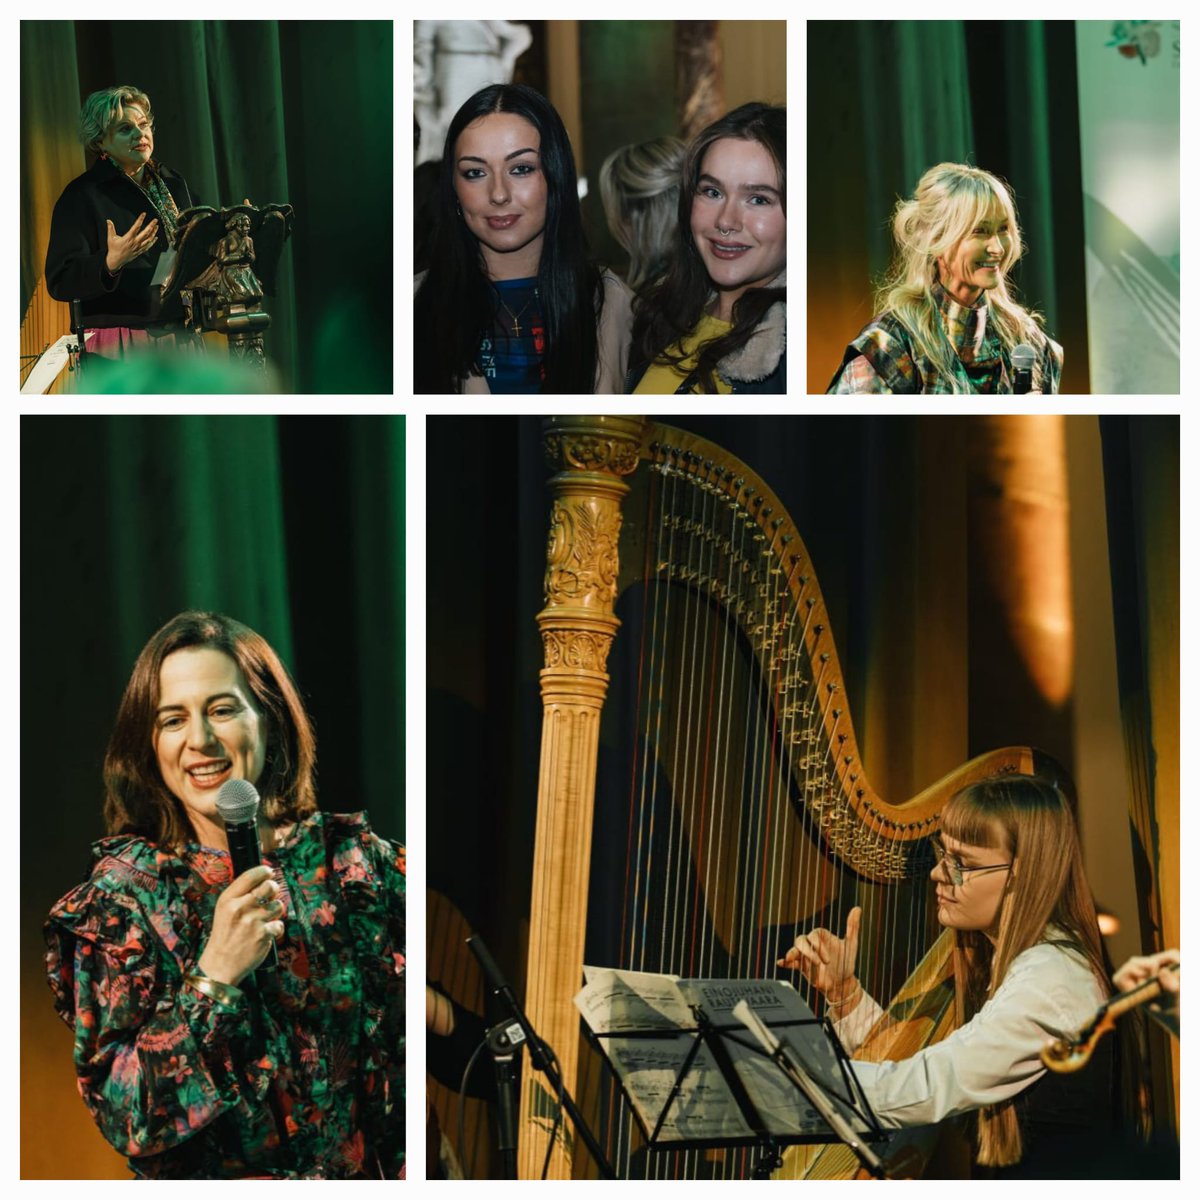 On #InternationalWomensDay , we look back at our St. Brigid's Day event celebrating the creativity of women. These are some of the inspirational women that the Embassy has recently worked with. @HelenSteeleFash @Bordbia @TourismIreland @rosiemurphyharp